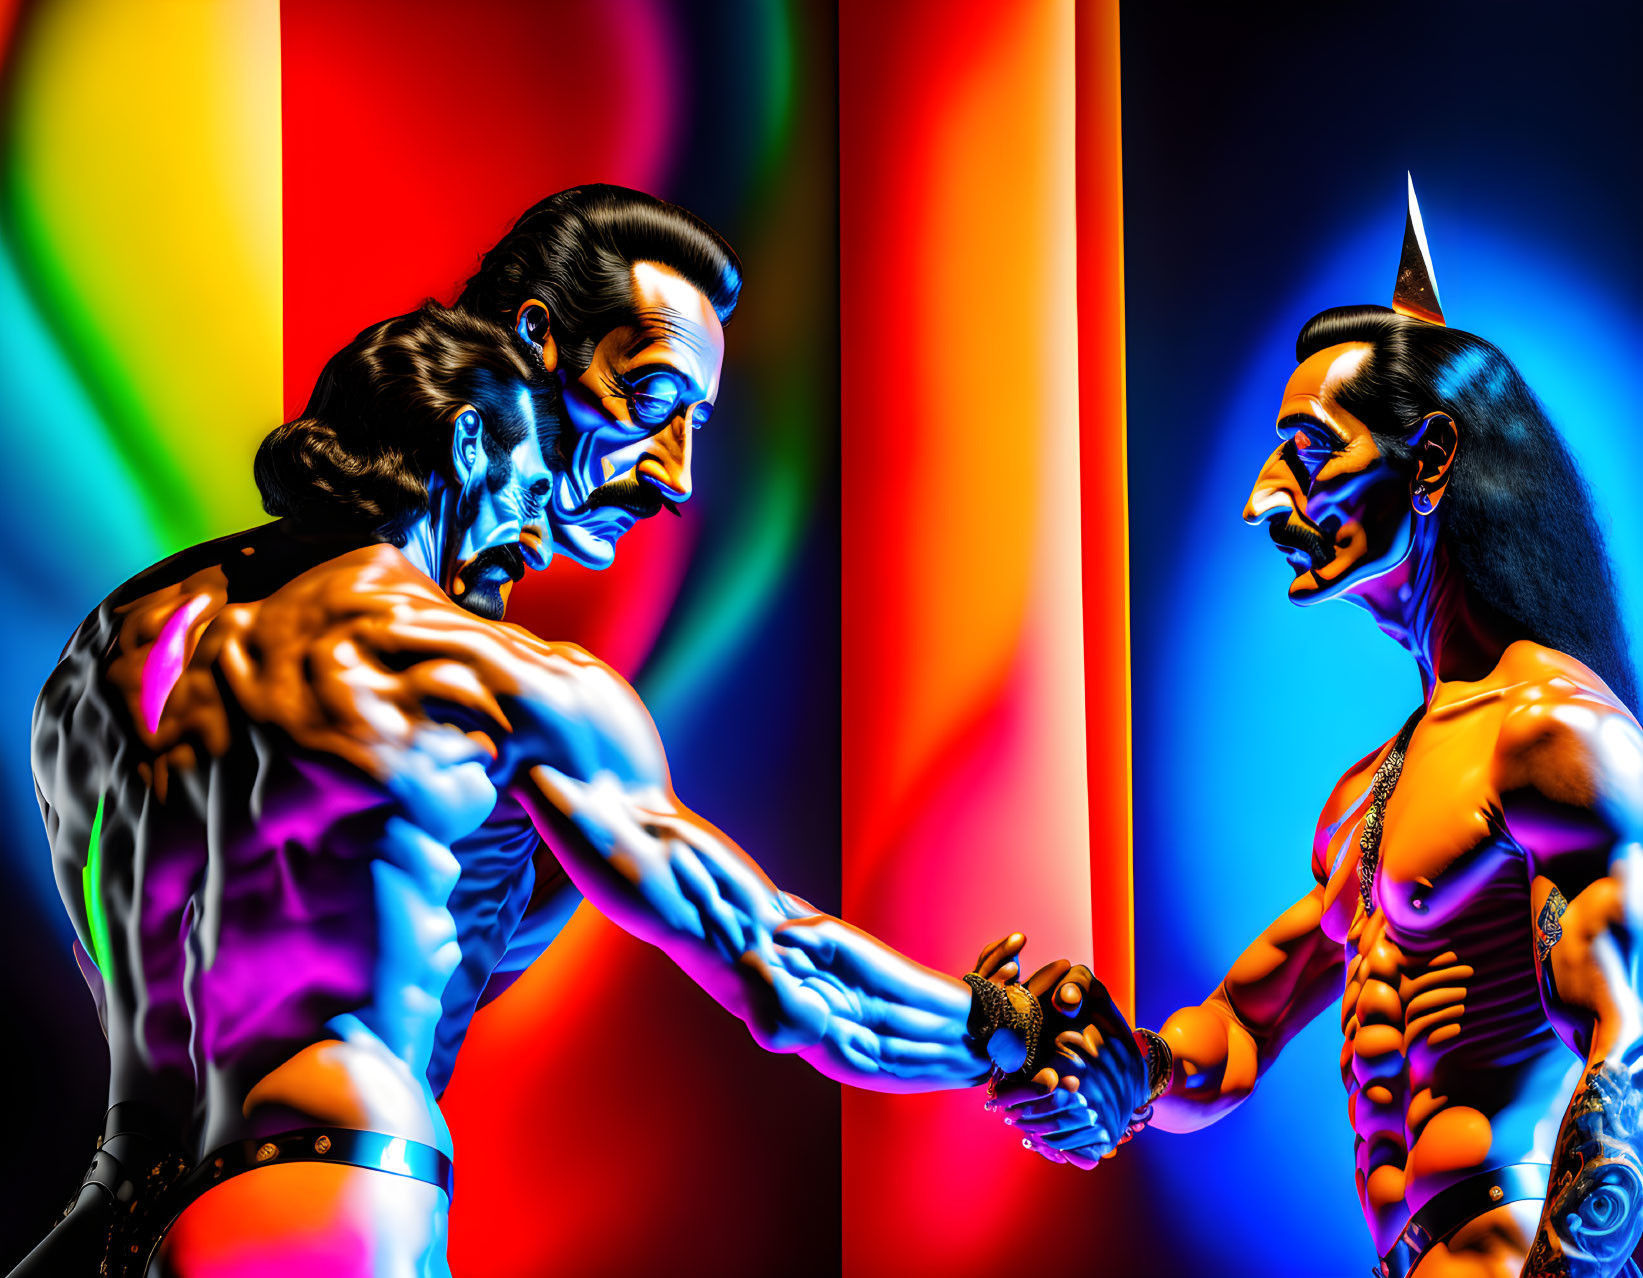 Muscular cybernetic figures with exoskeletons shaking hands on vibrant background